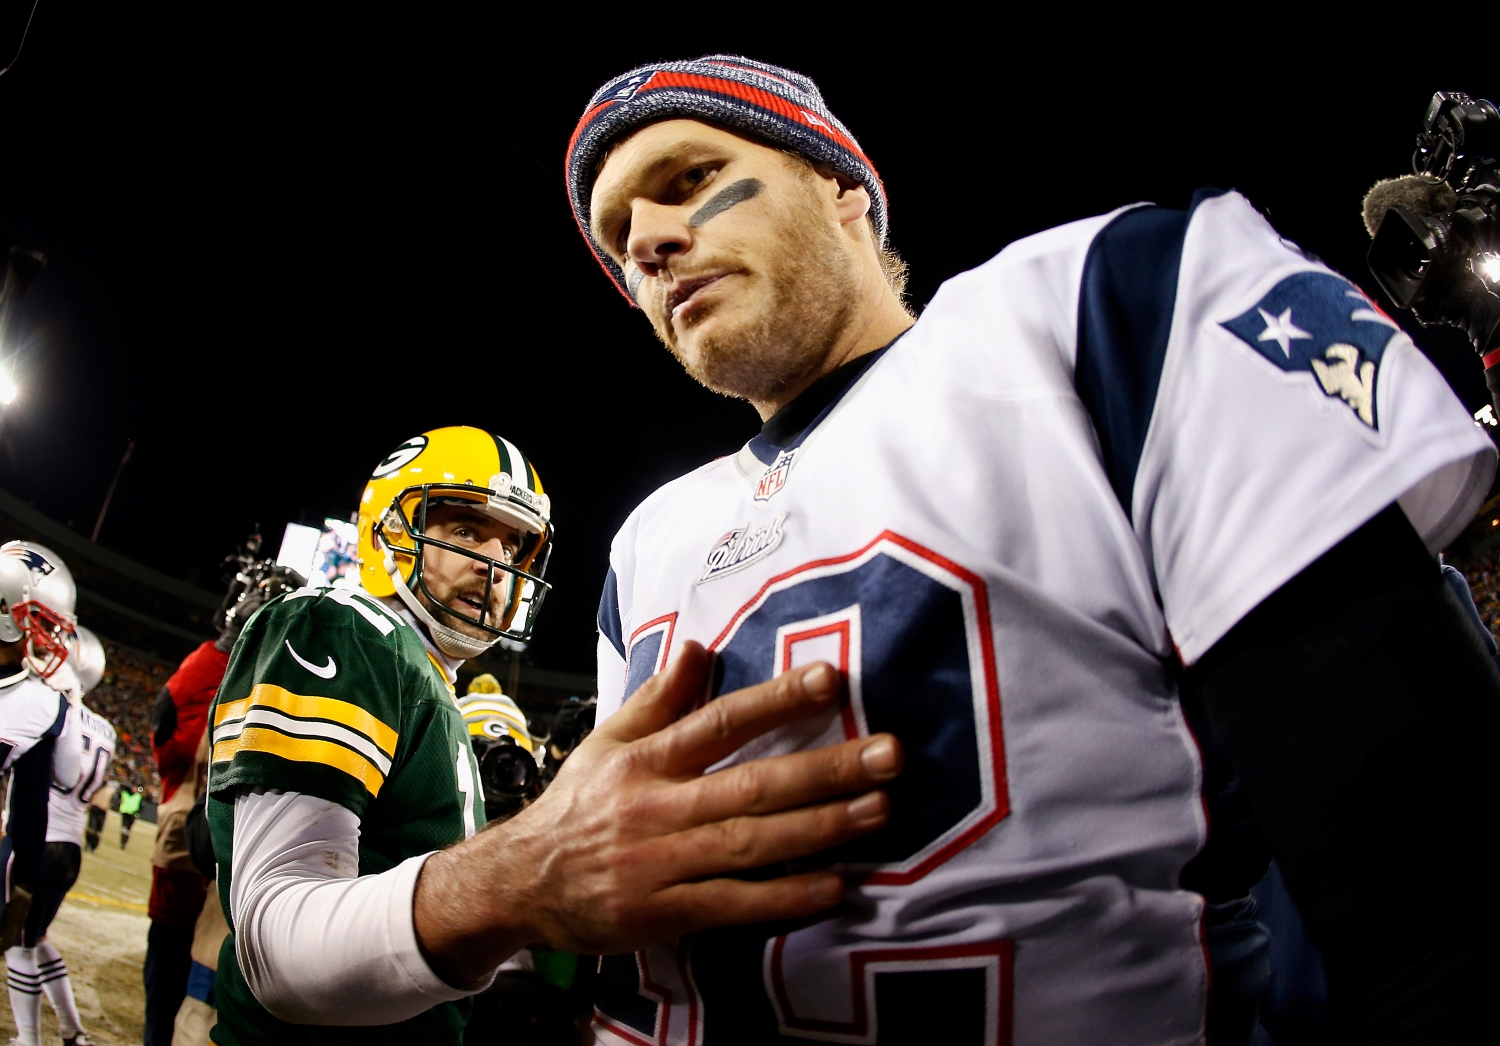 New England Patriots QB Tom Brady walks away from Green Bay Packers QB Aaron Rodgers after they shake hands.